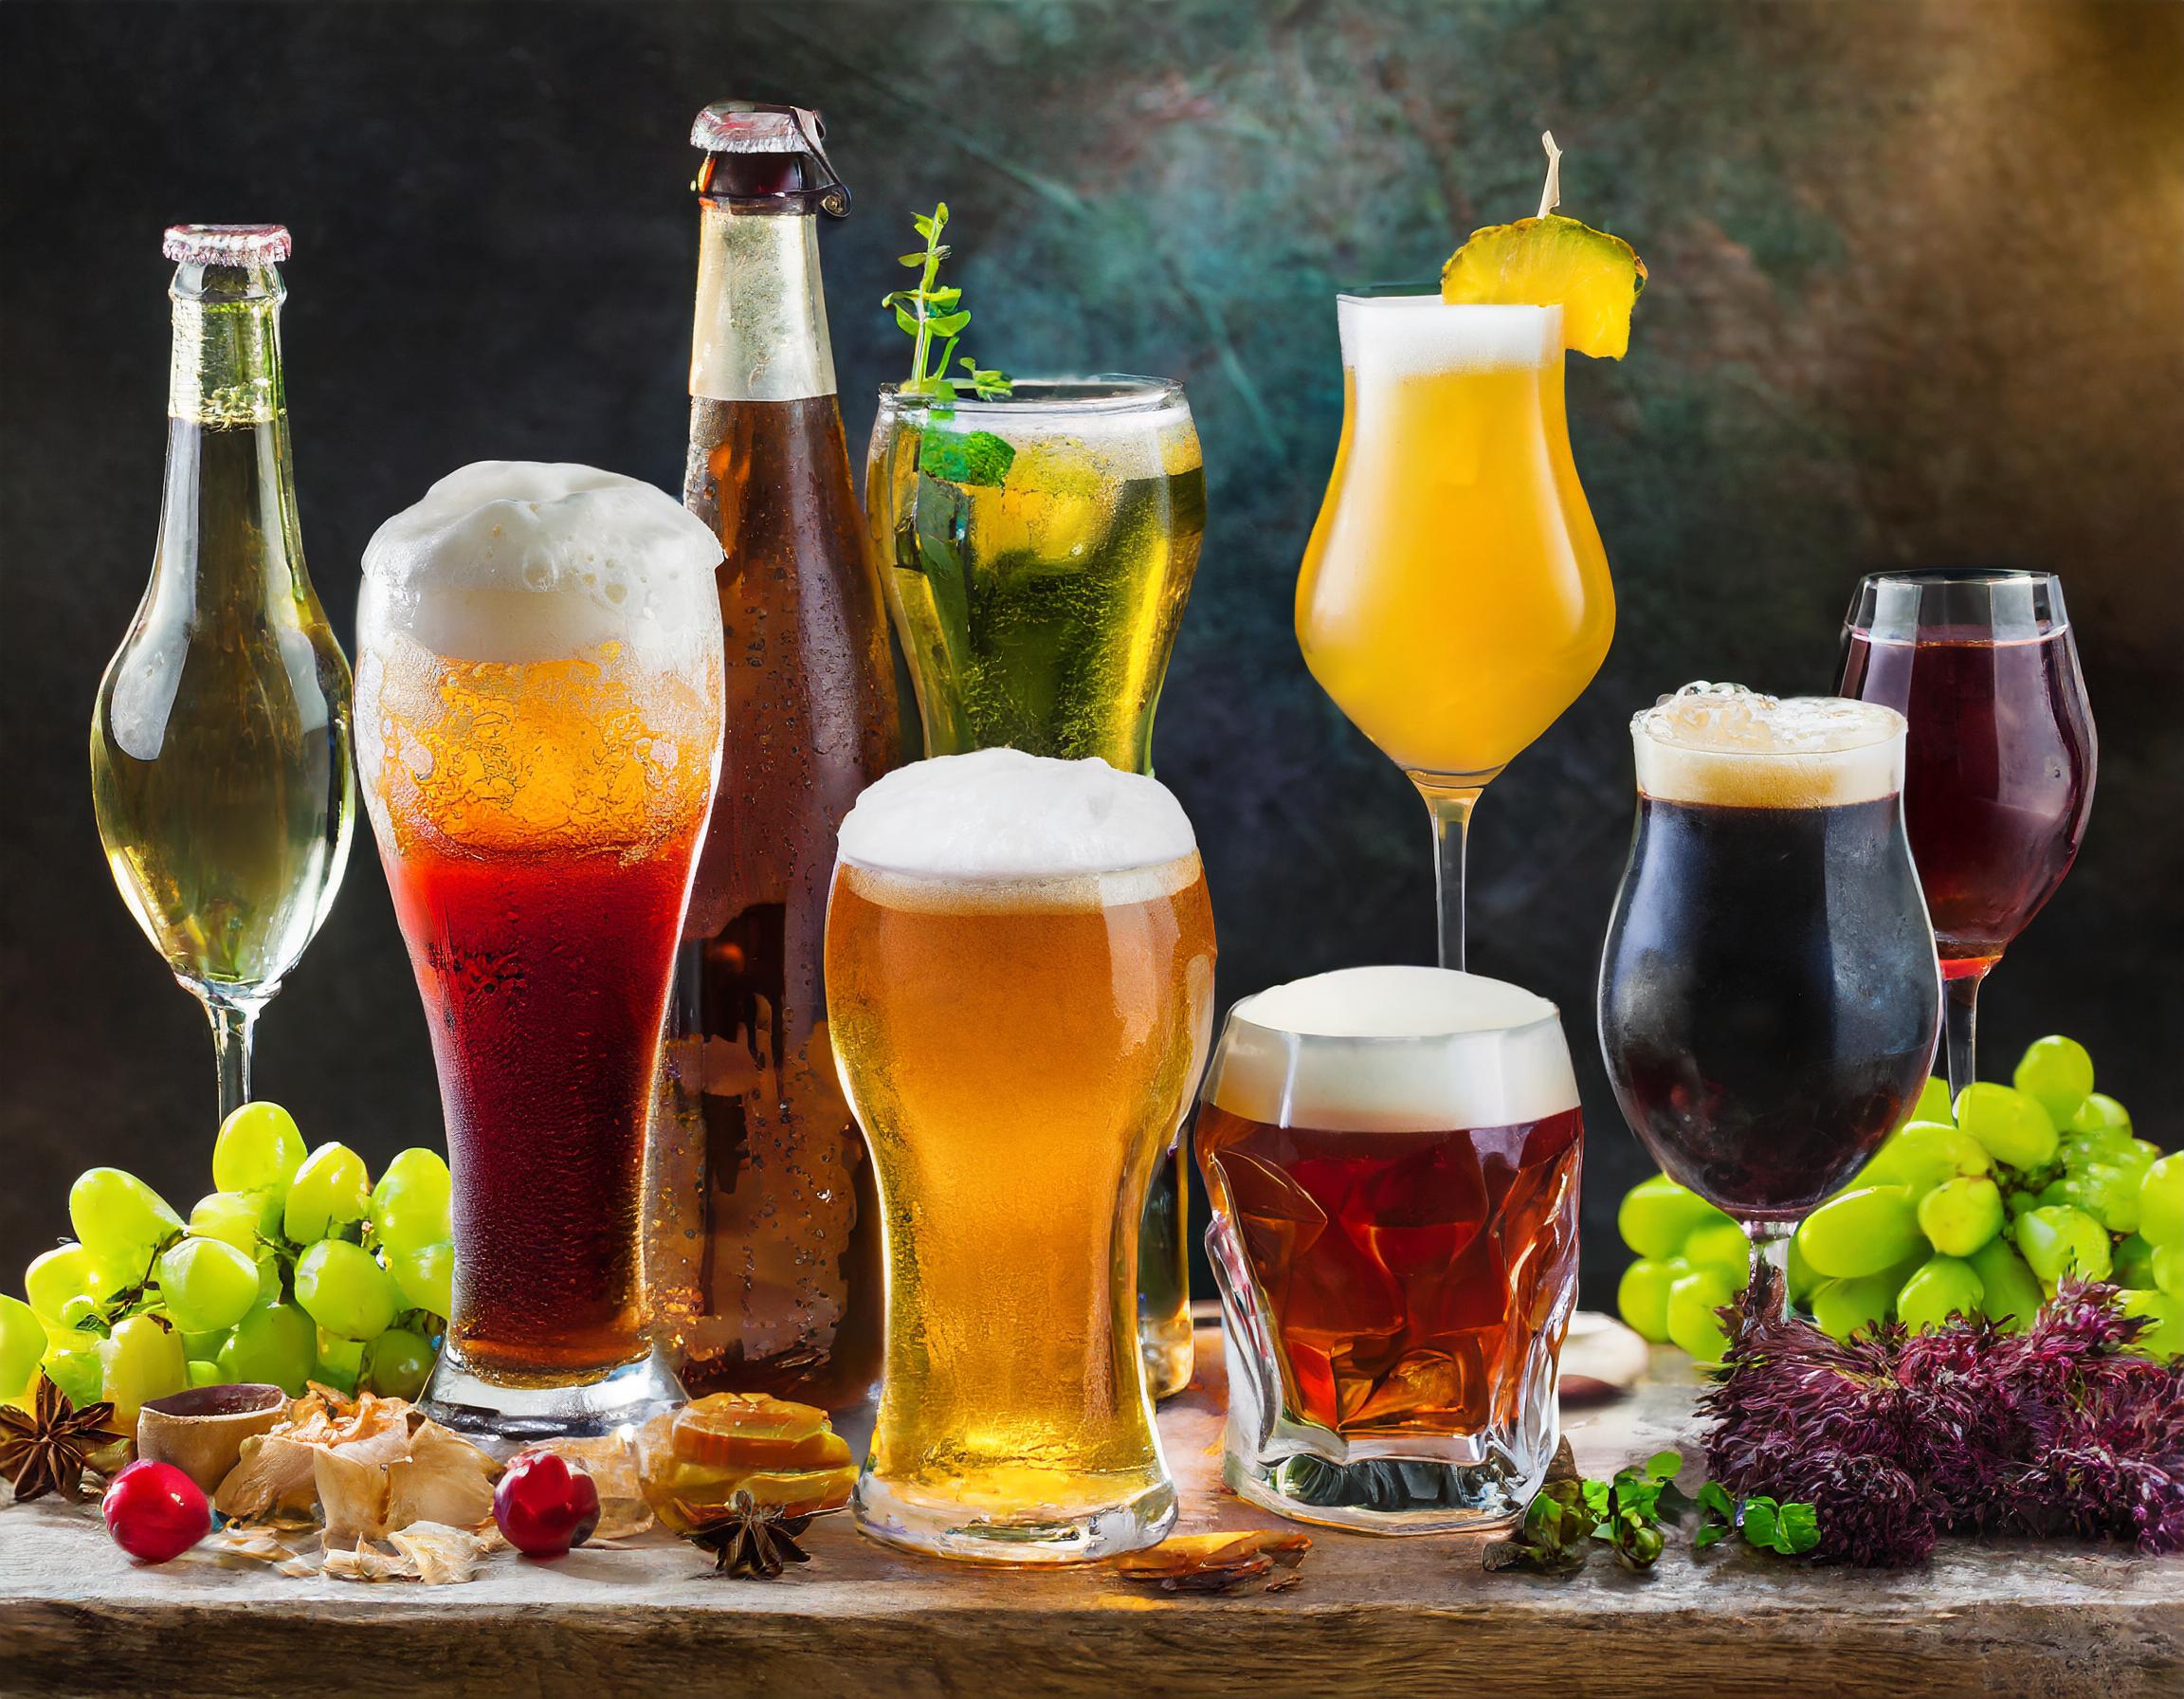 Firefly diverse picture of beers wines nonalcoholic drinks and coctails 24969 » Pivovar Zichovec